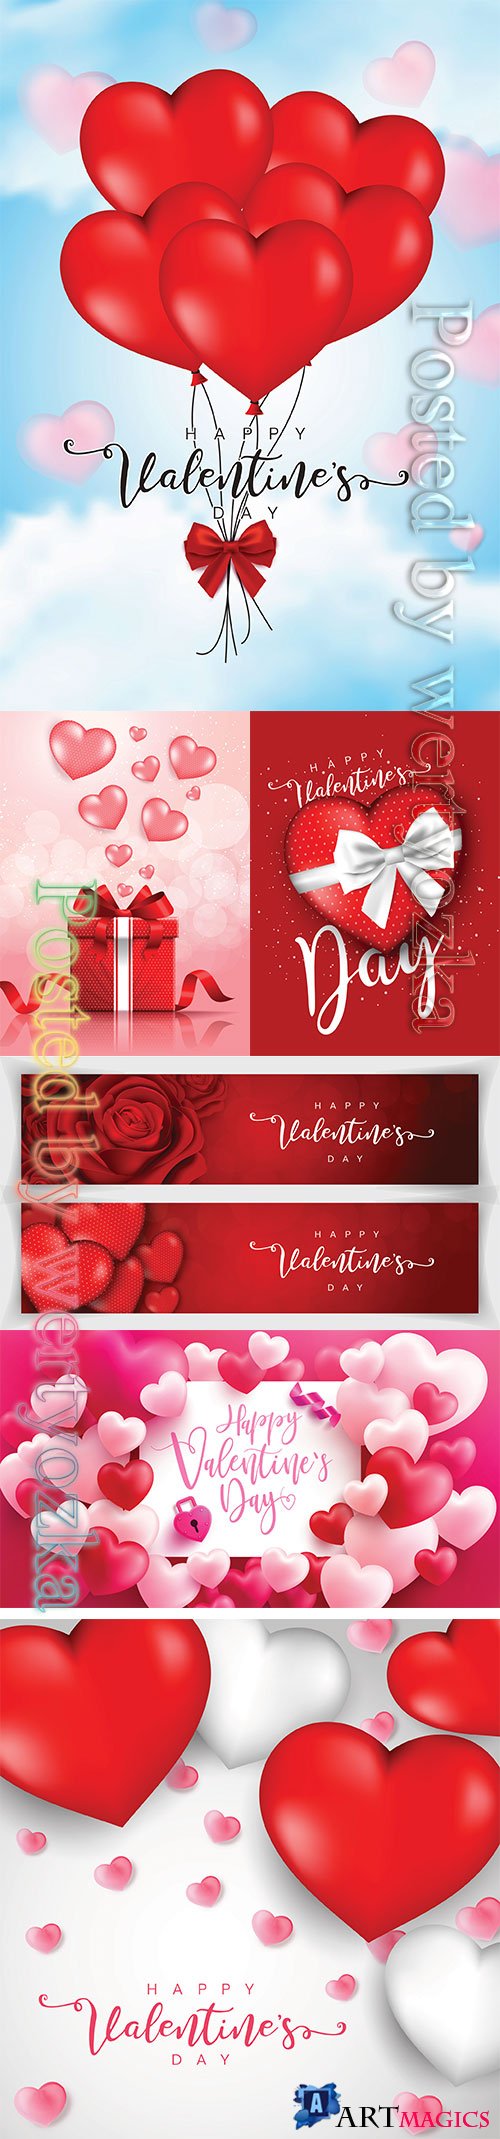 Valentine's Day poster or banner, background for love and Valentine's day concept